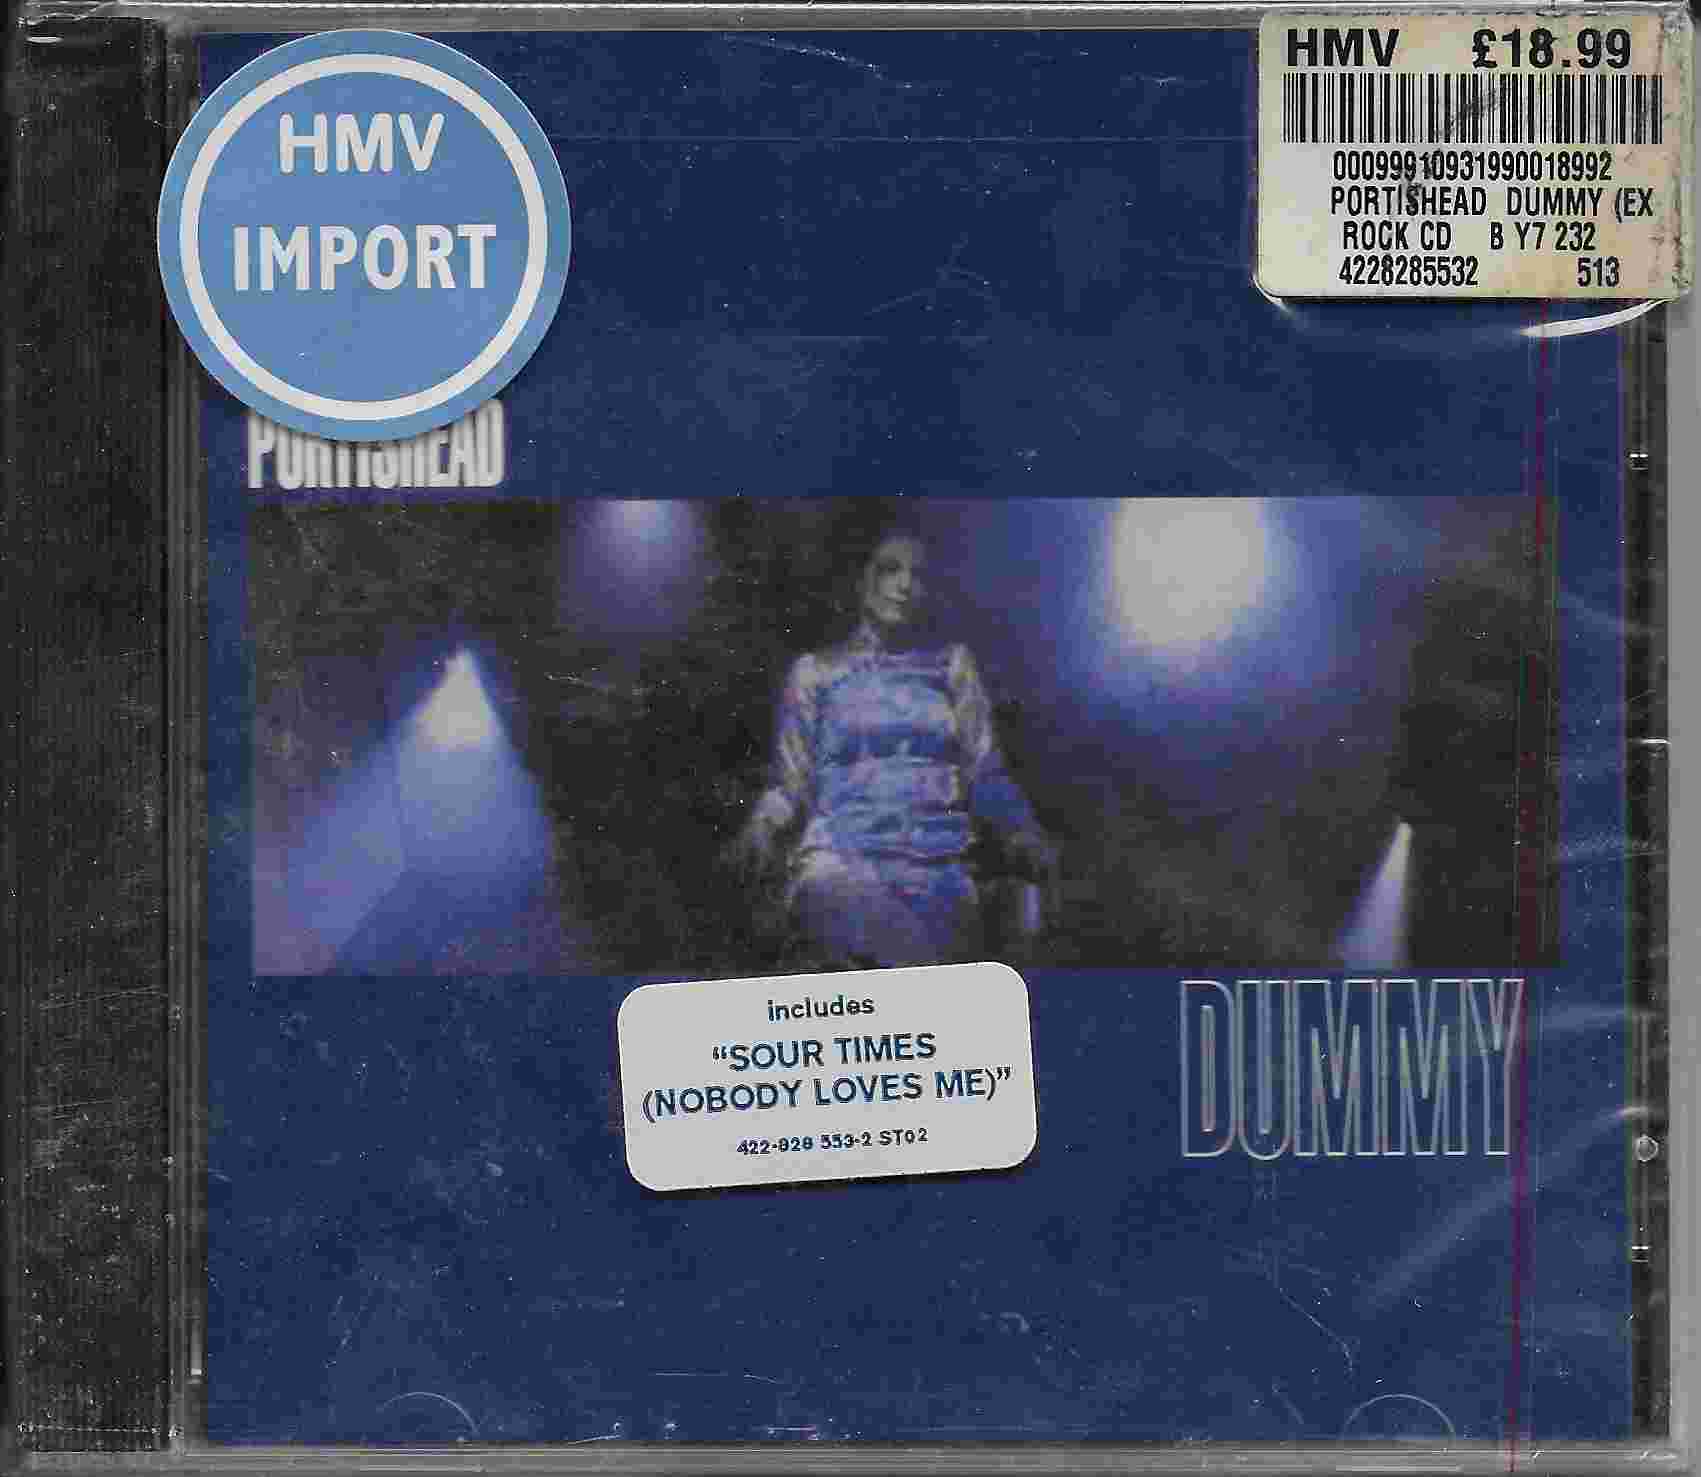 Picture of 422828553 - 2 Dummy - US import (Different tracks) by artist Portishead 